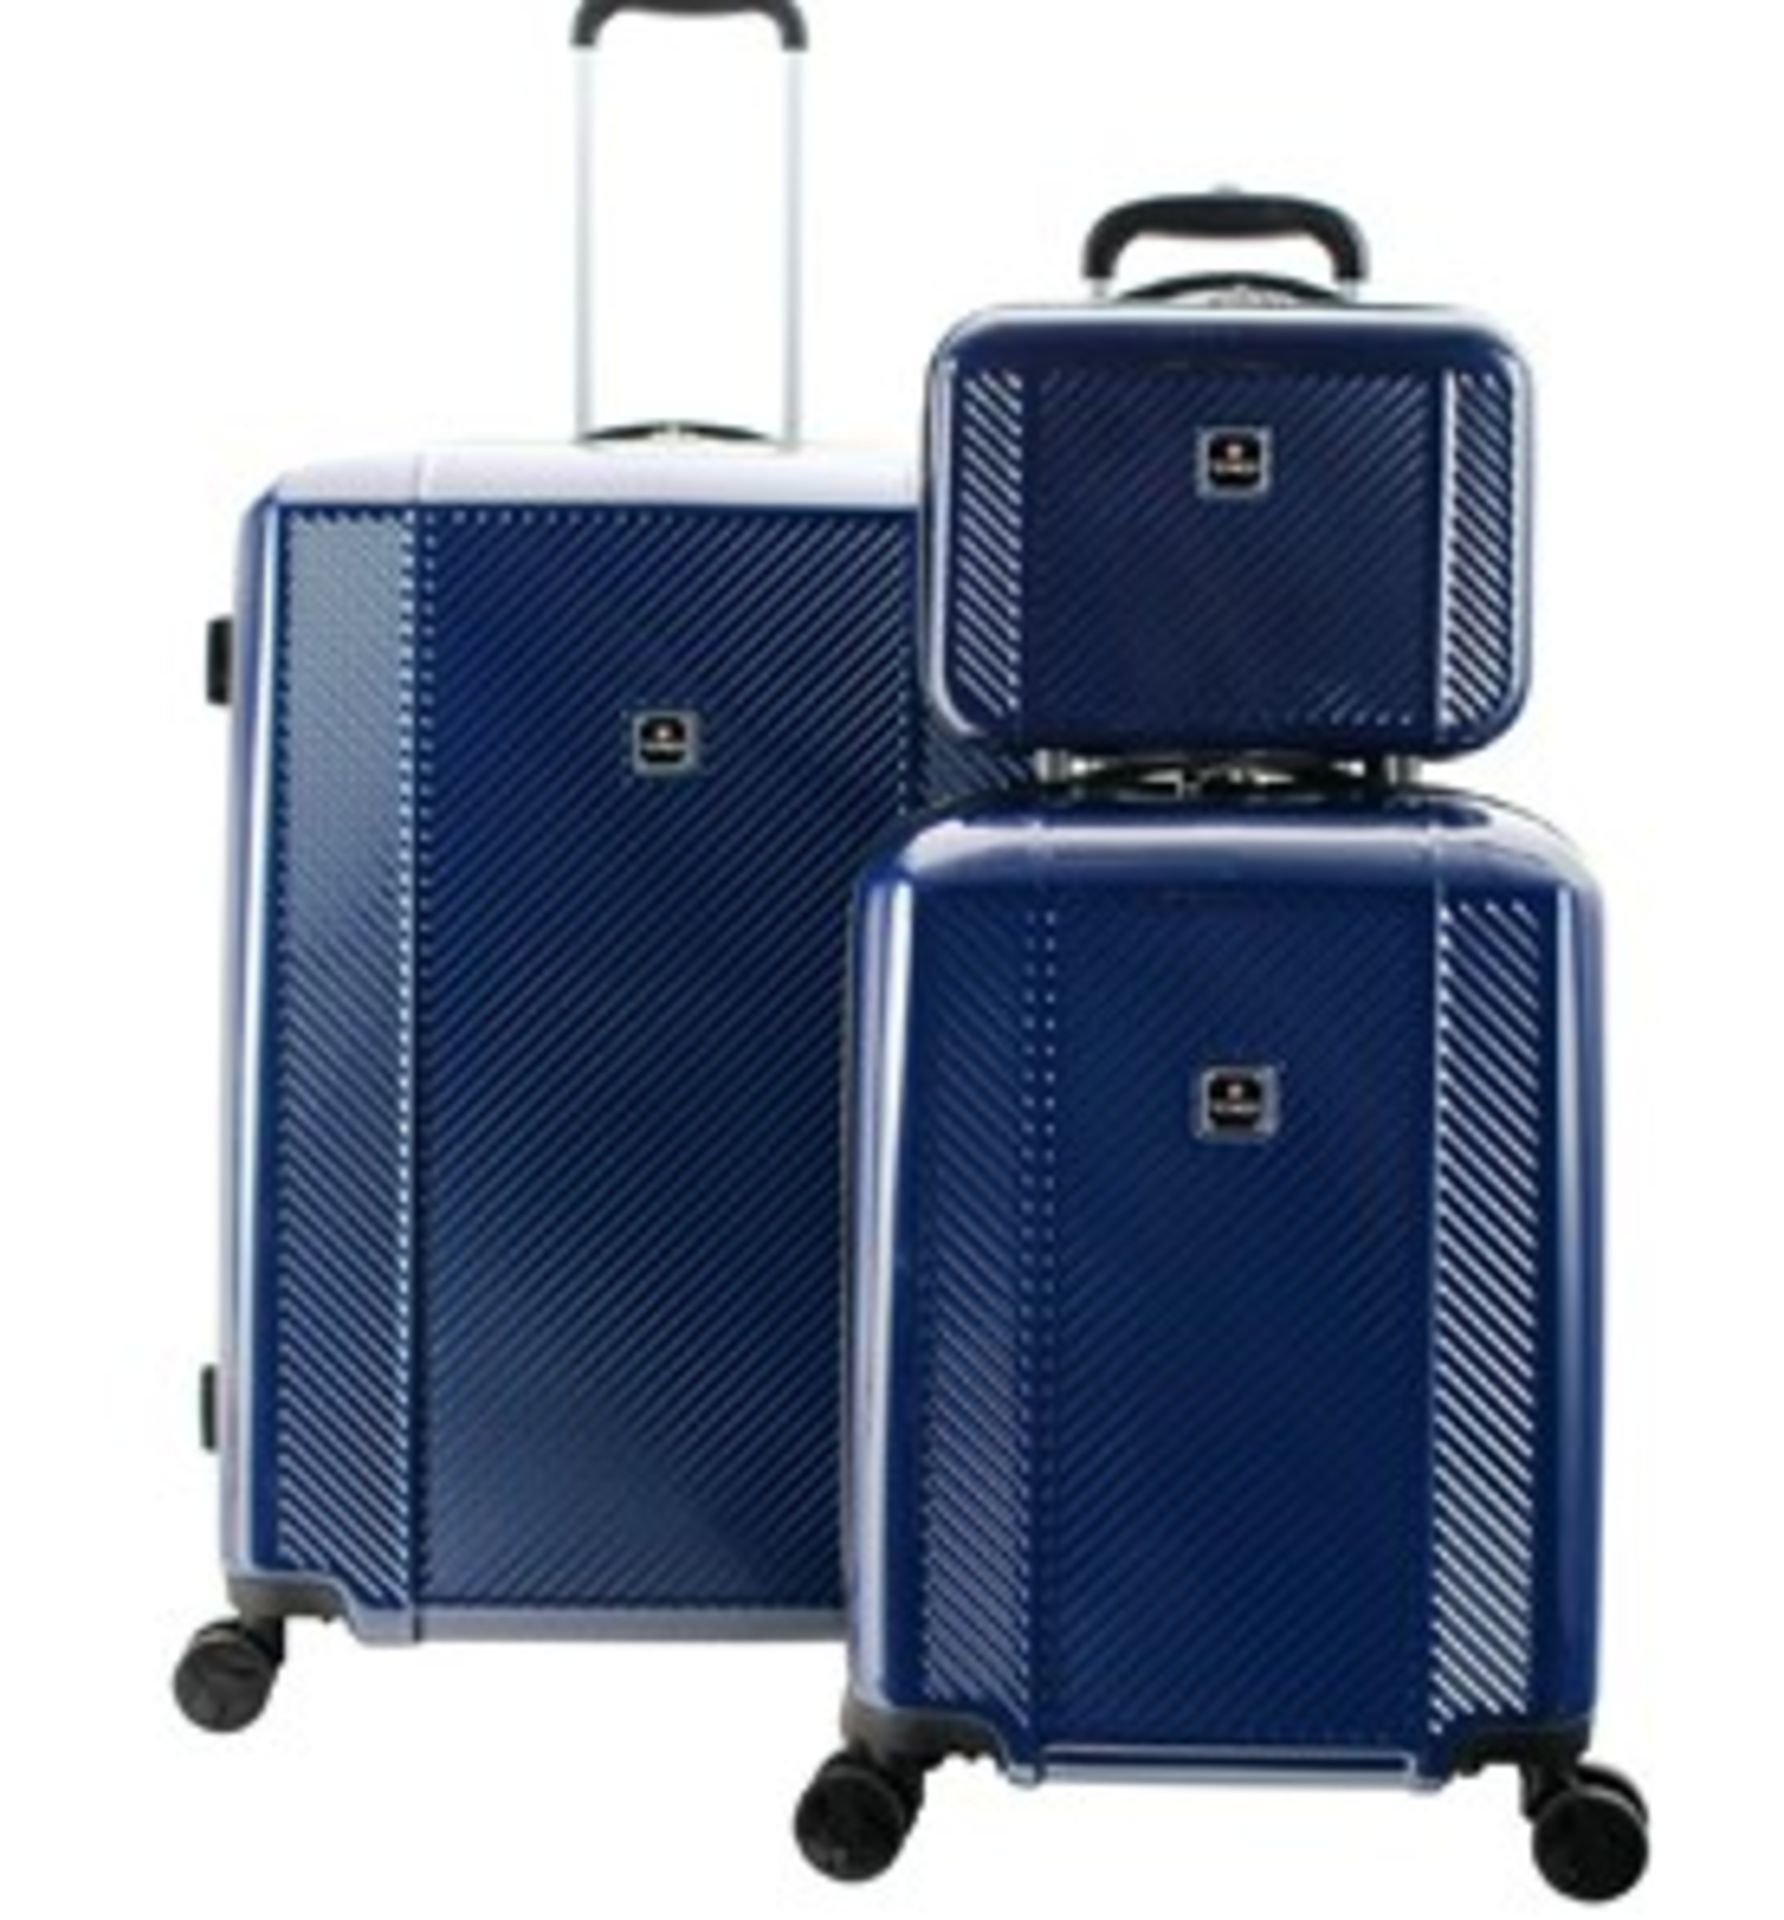 Pallet To Contain 16 x New Boxed 3 Piece Sets of TAG Spectrum Hardside Luggage Set. (BLUE). RRP £ - Image 3 of 4